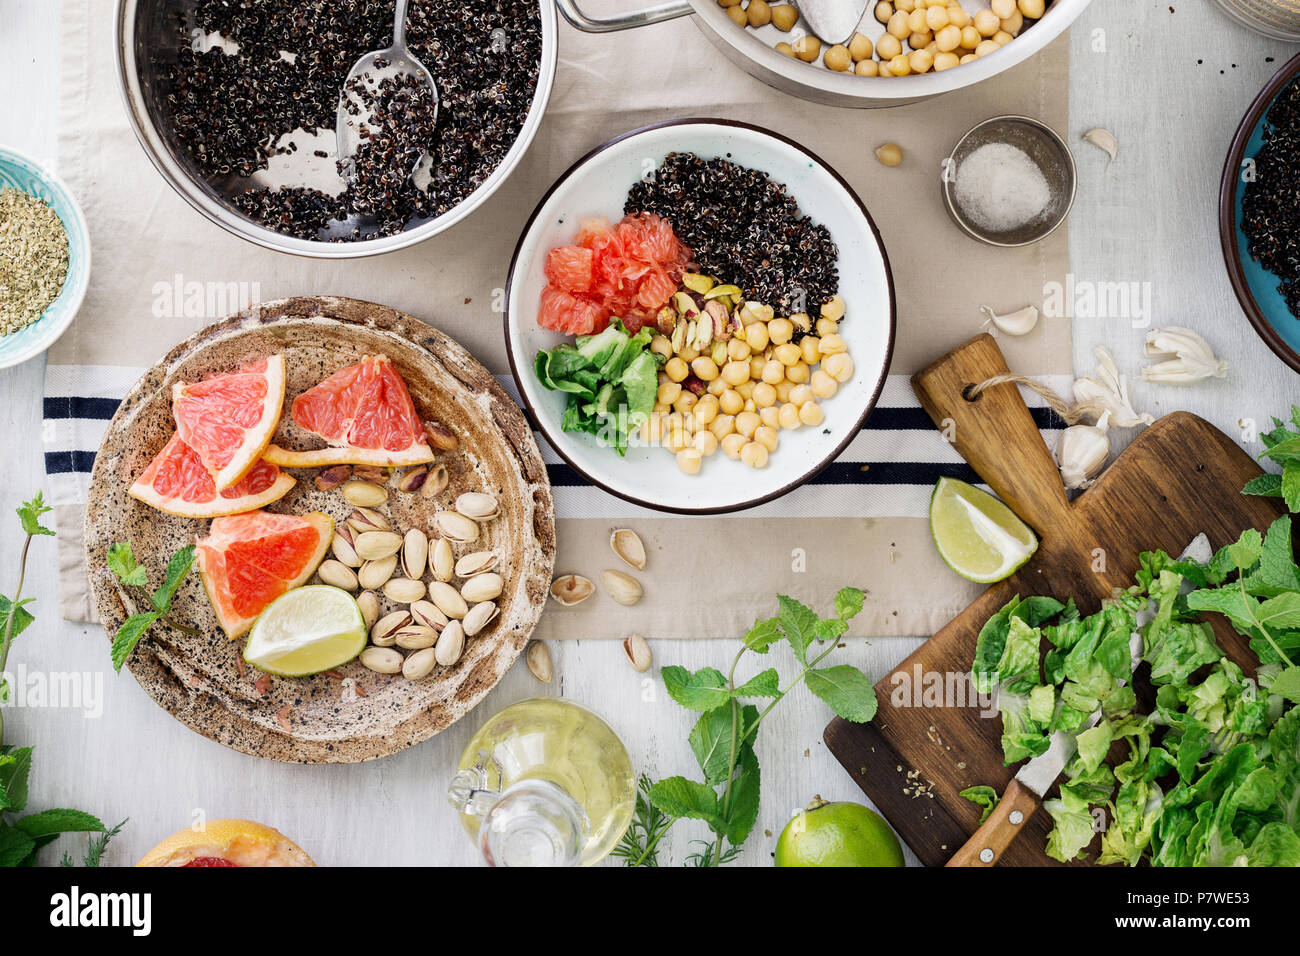 Ingredients for cooking vegetarian salad with black quinoa, chickpea, nuts and fruits on wooden table, top view. Superfood concept Stock Photo